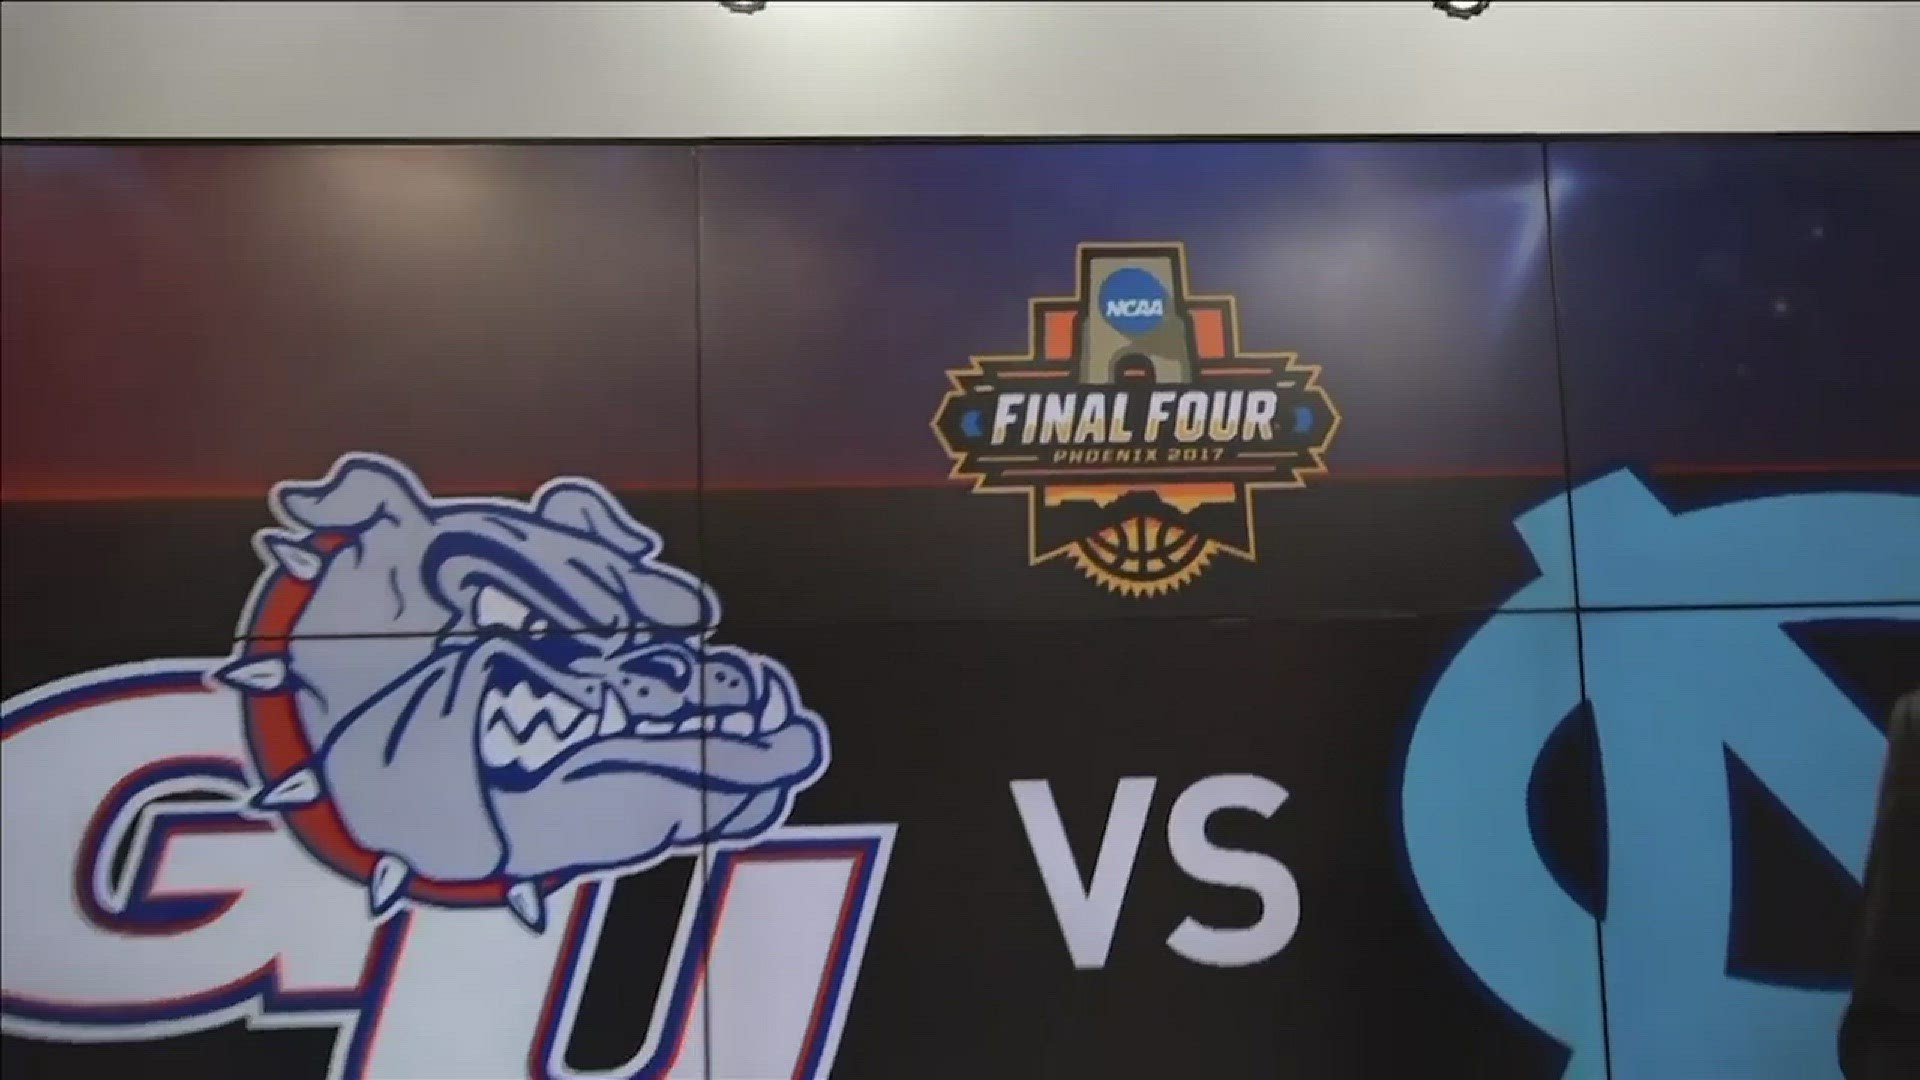 Will it be the Bulldogs or the Tar Heels? The KHOU 11 Sports team shares their thoughts on who will win and why.